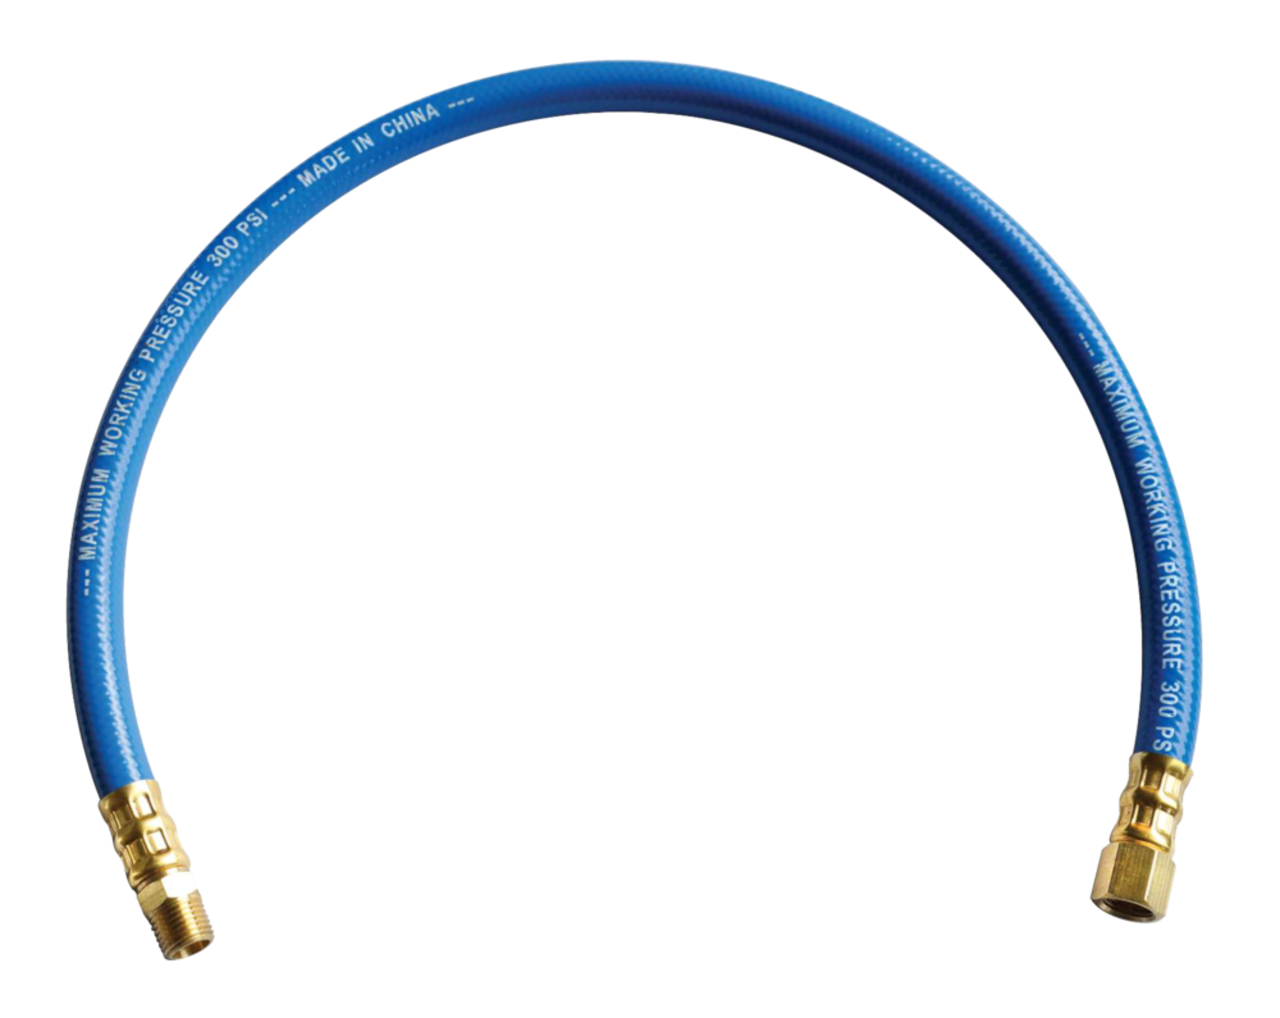 Reelcraft 601048-6 - 5/8 in. x 6 ft. Air/Water Inlet Hose